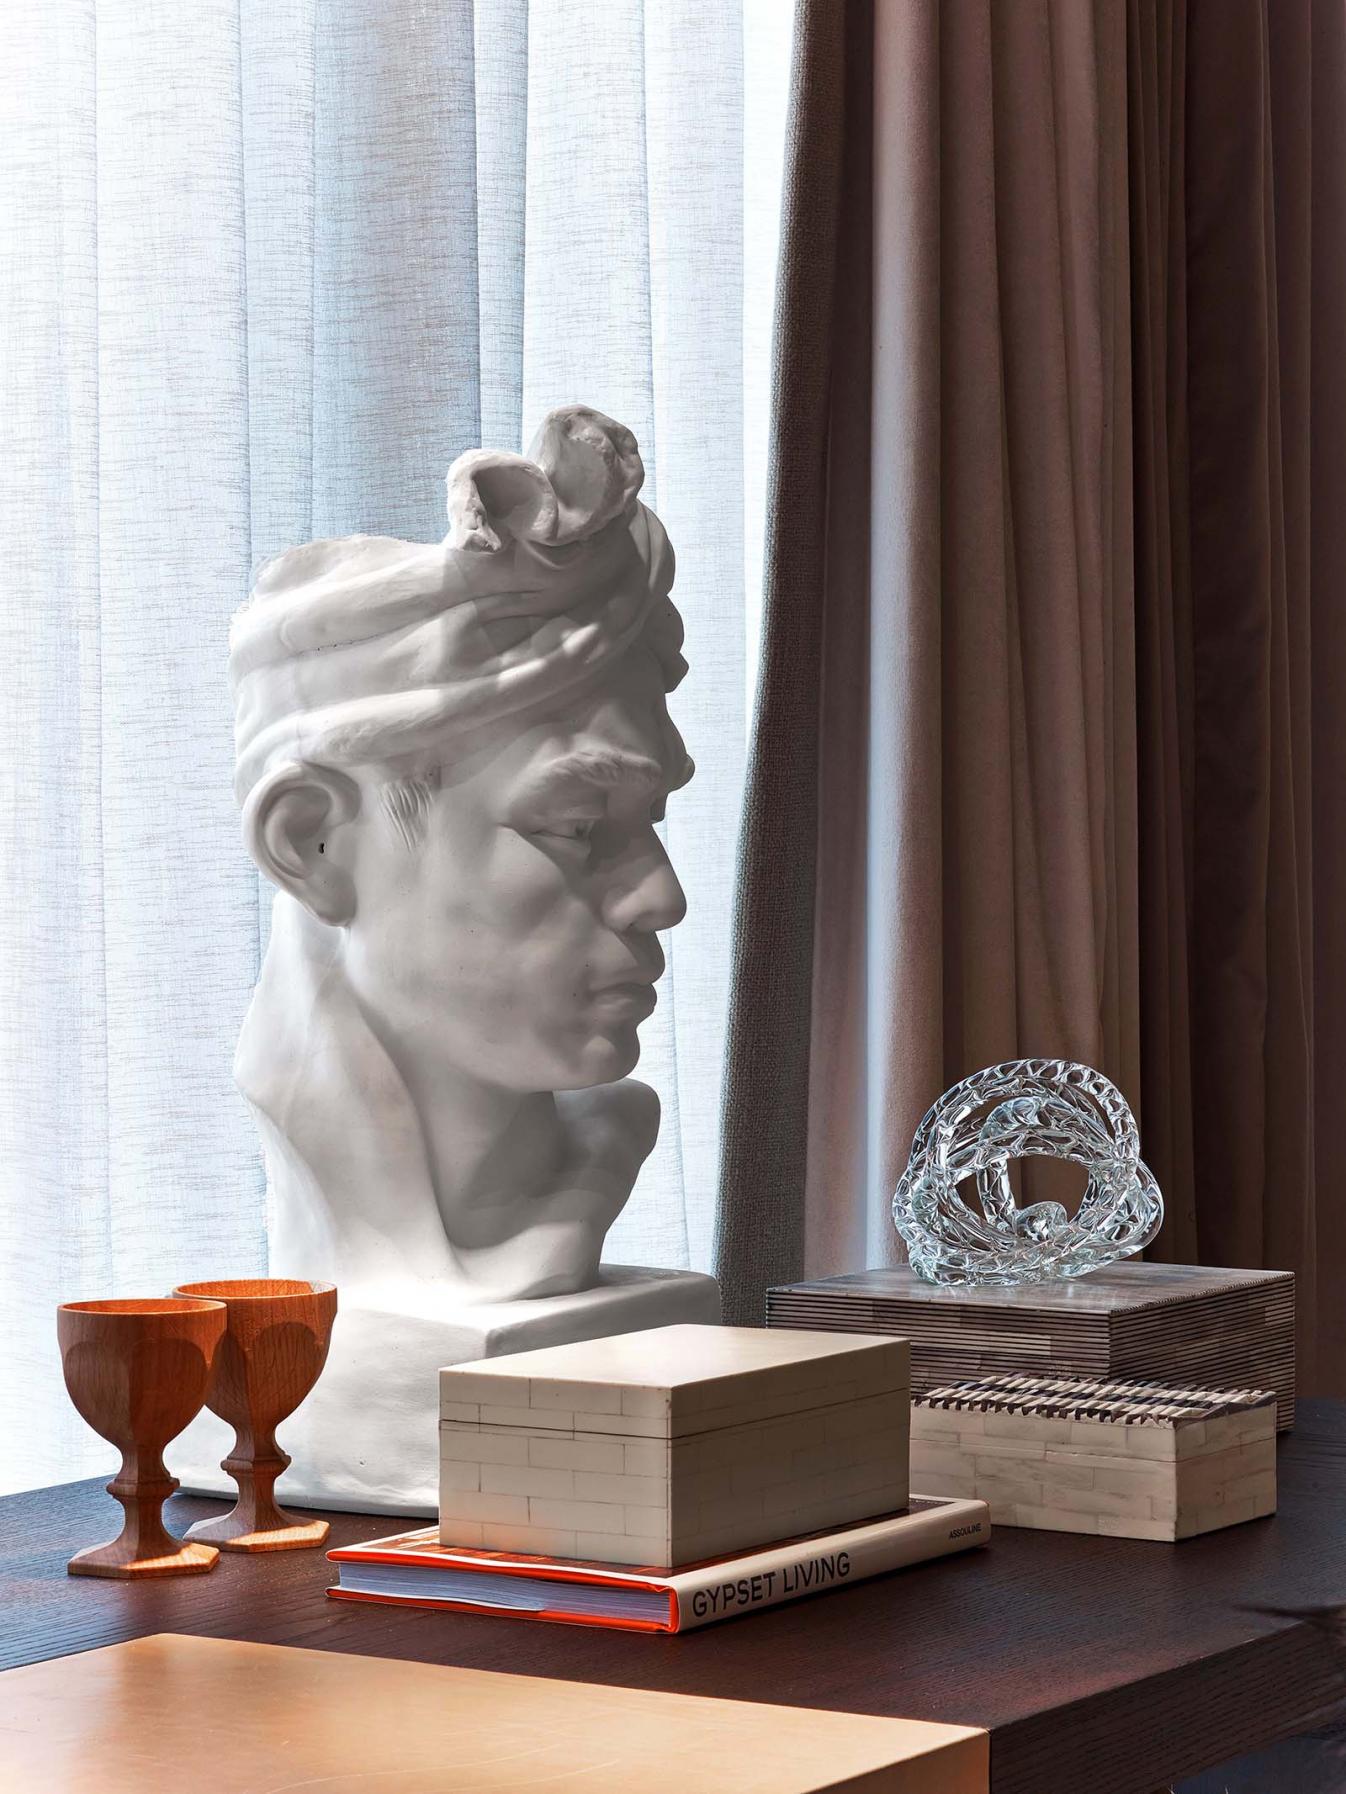 A well sculptured bust sits atop a table facing to the right